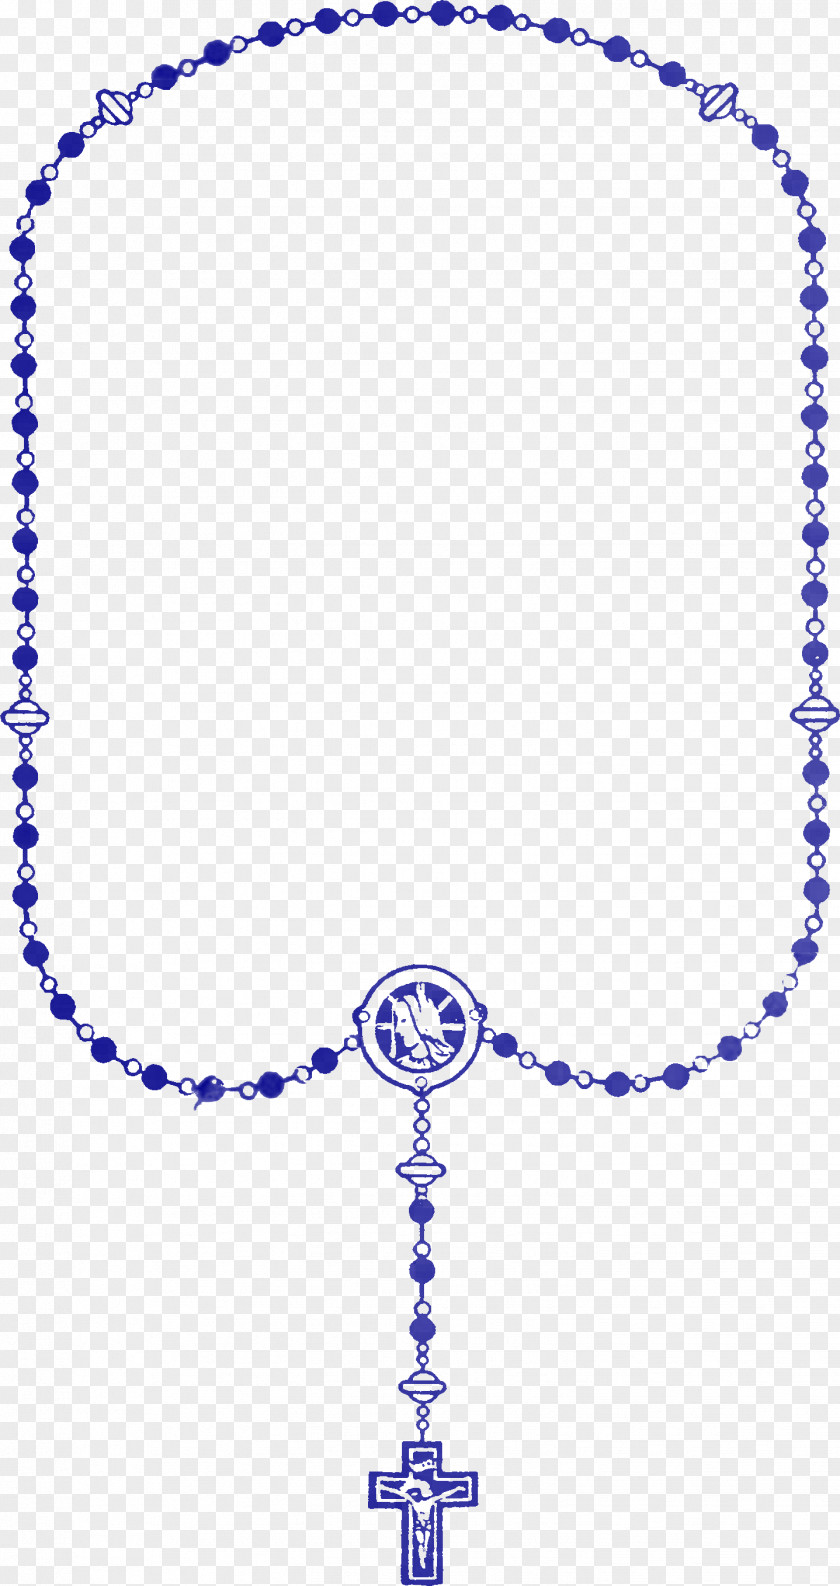 Beads Graphic The Power Of Rosary Prayer Chaplet PNG